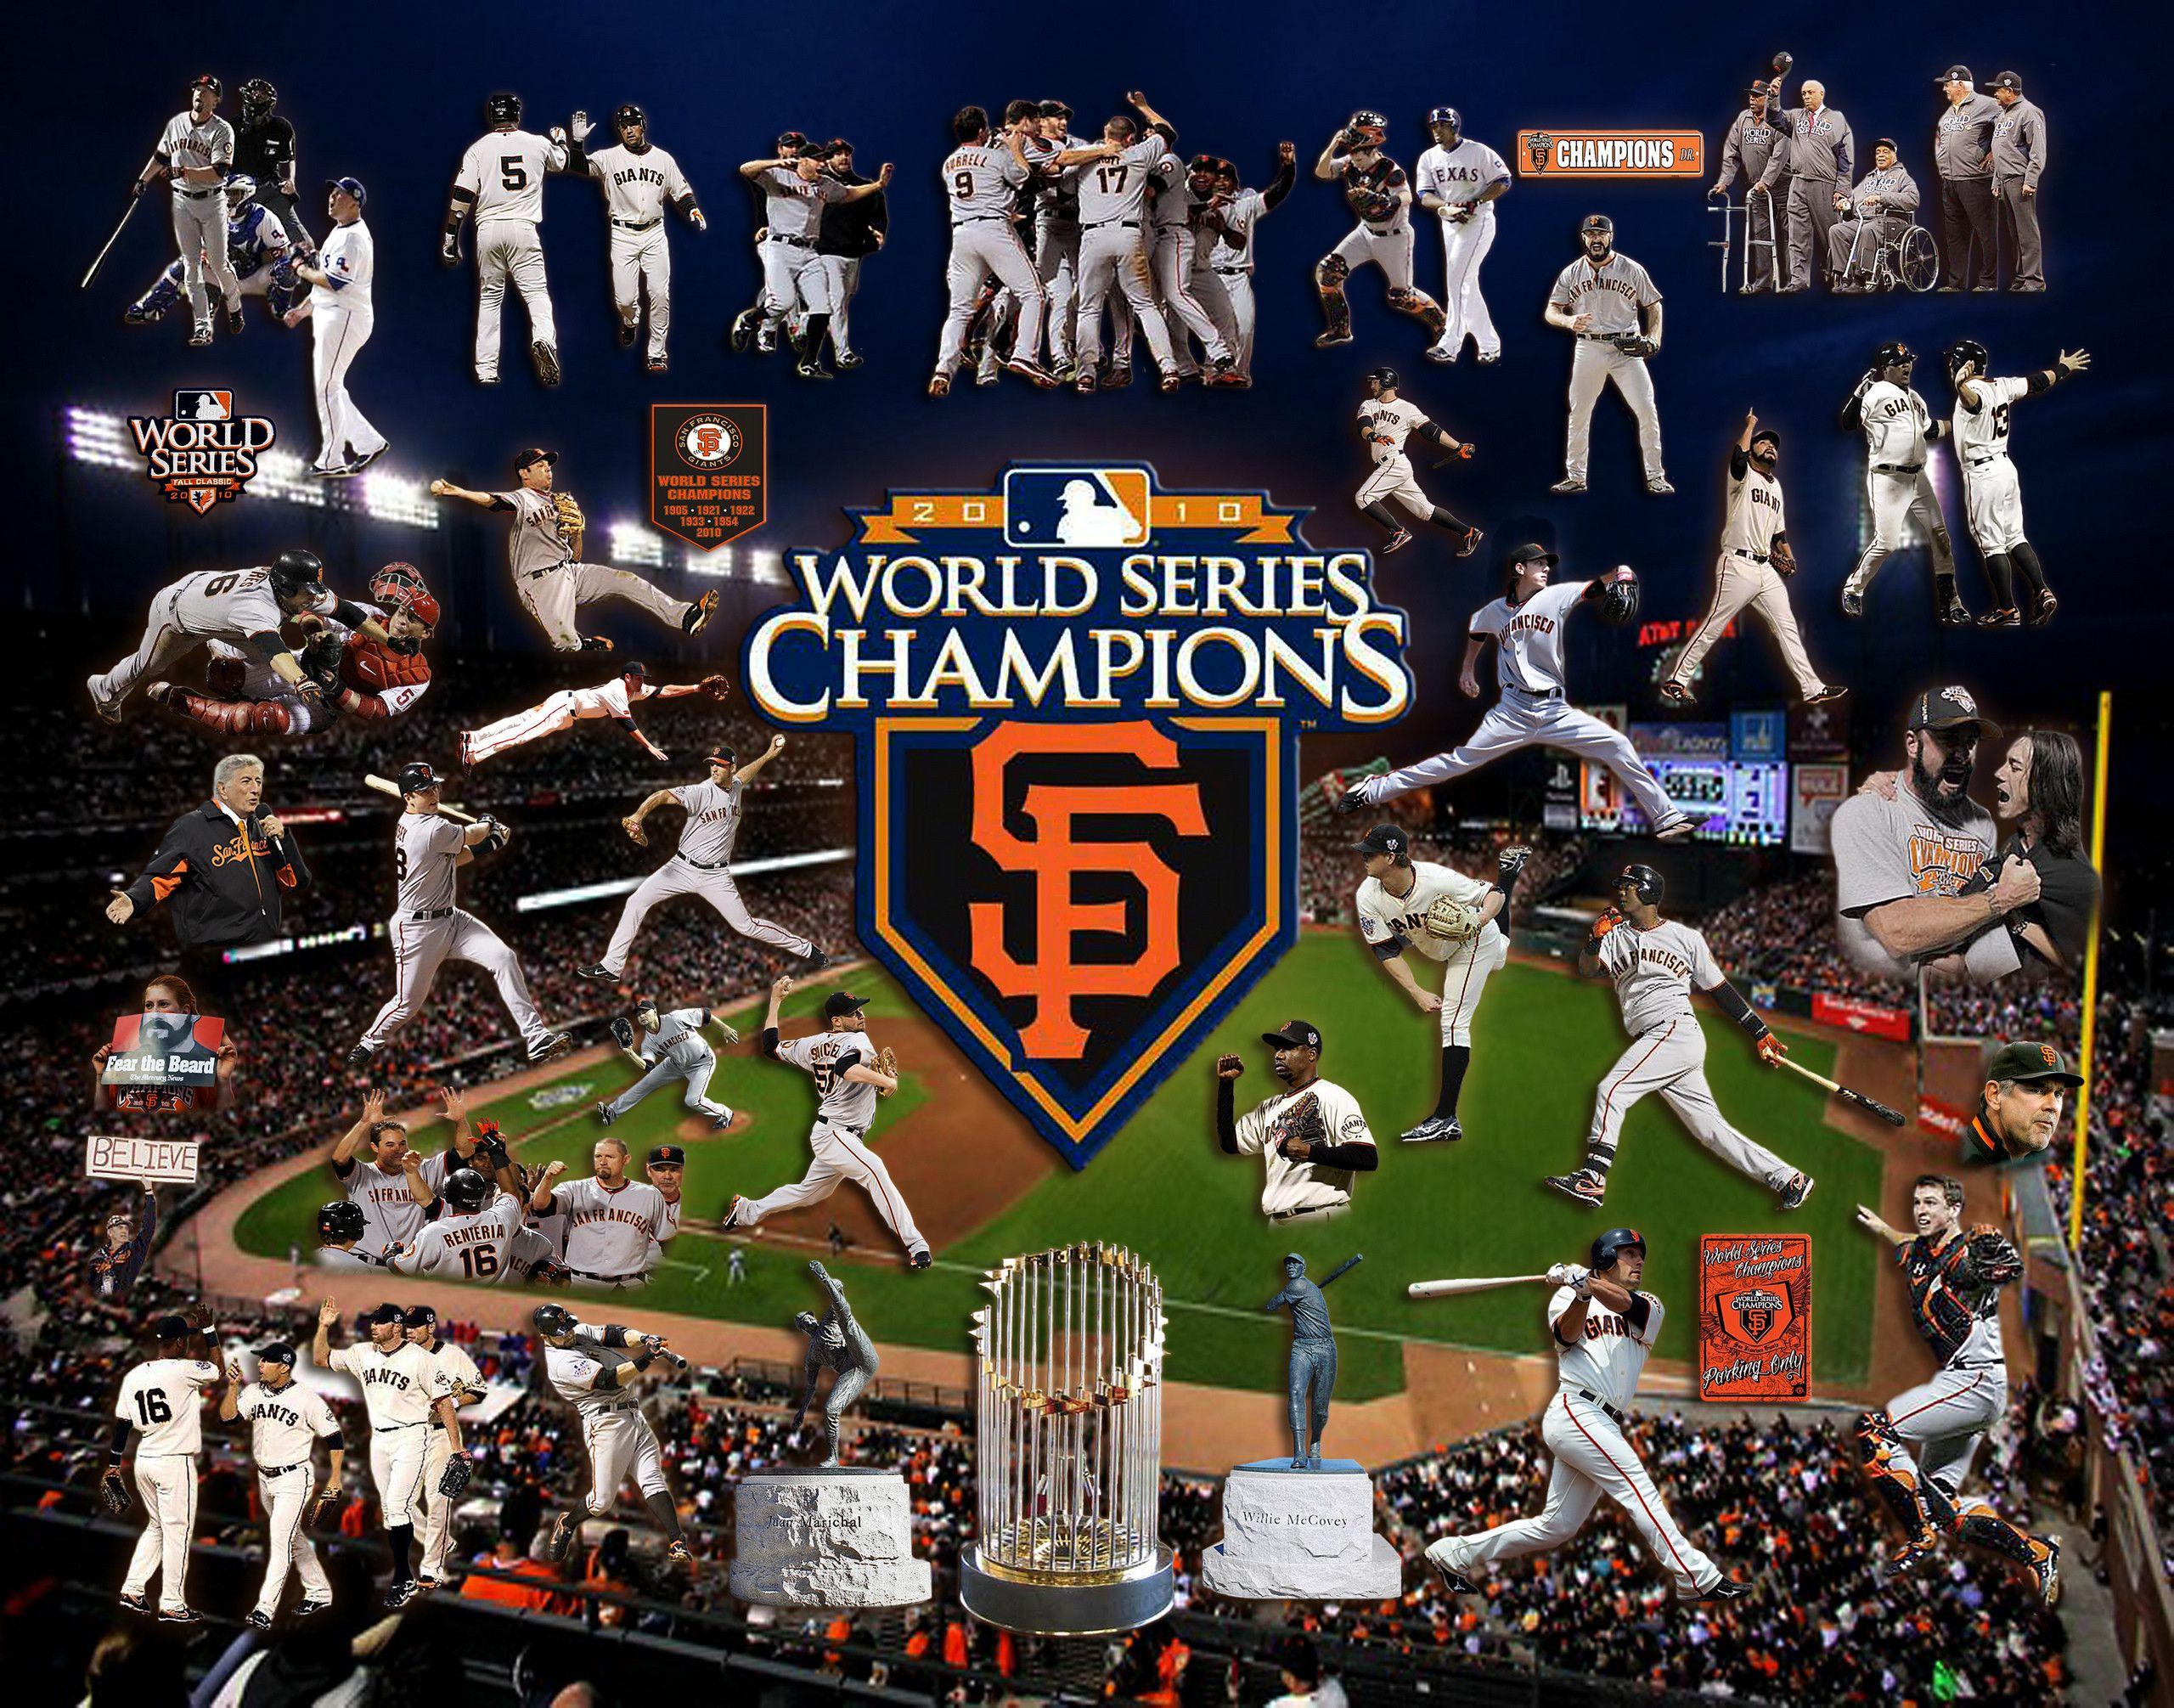 San Francisco Giants Wallpaper background picture